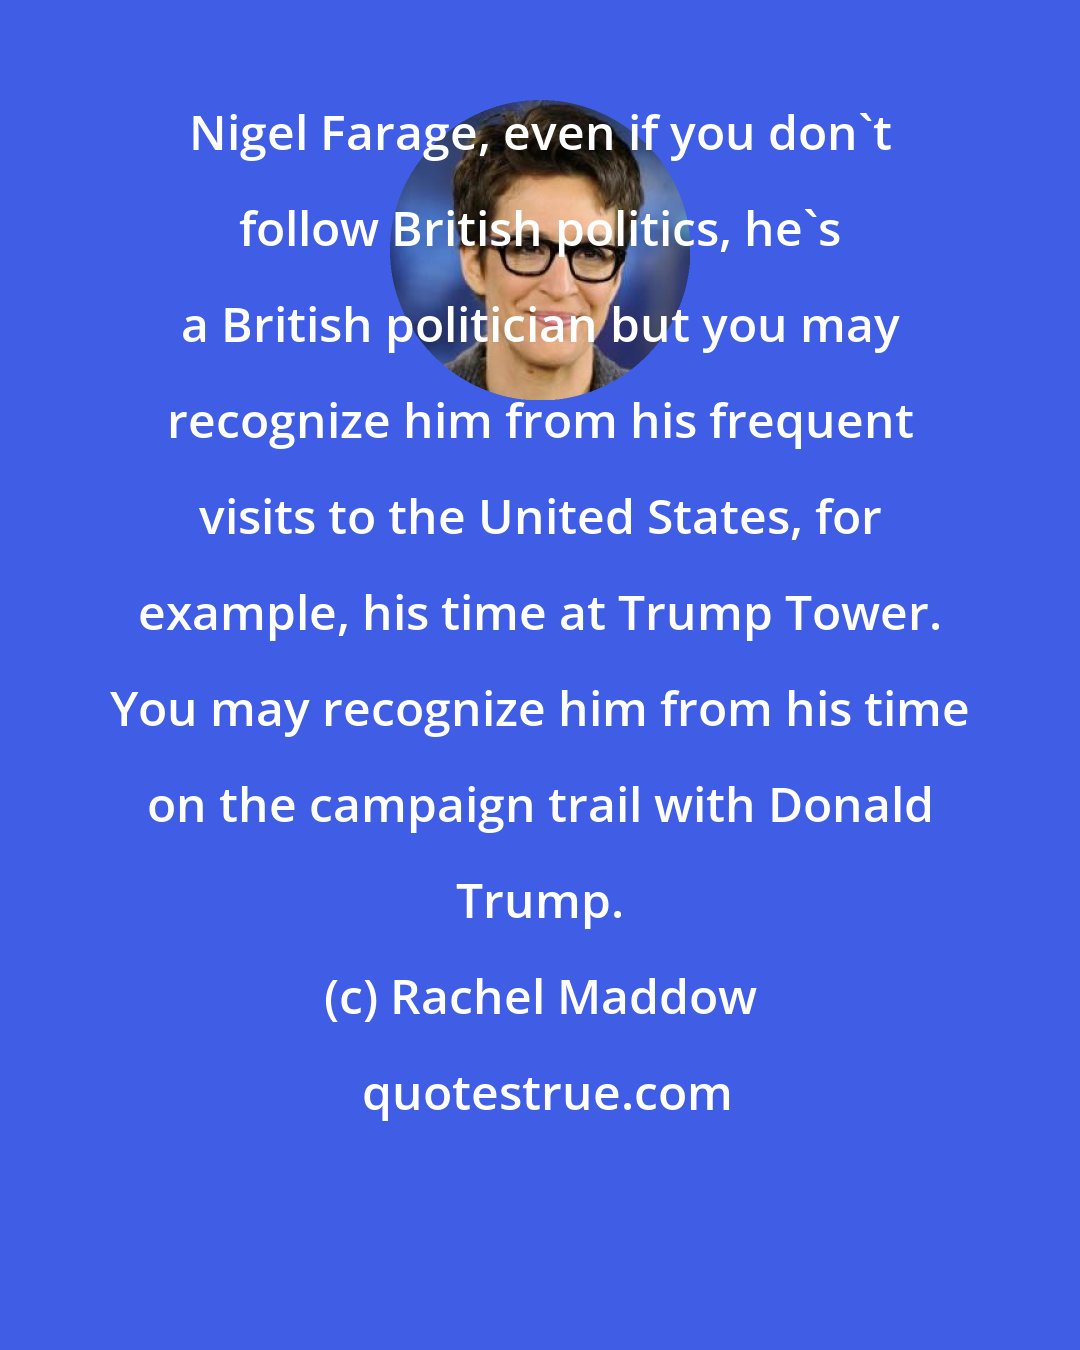 Rachel Maddow: Nigel Farage, even if you don`t follow British politics, he`s a British politician but you may recognize him from his frequent visits to the United States, for example, his time at Trump Tower. You may recognize him from his time on the campaign trail with Donald Trump.